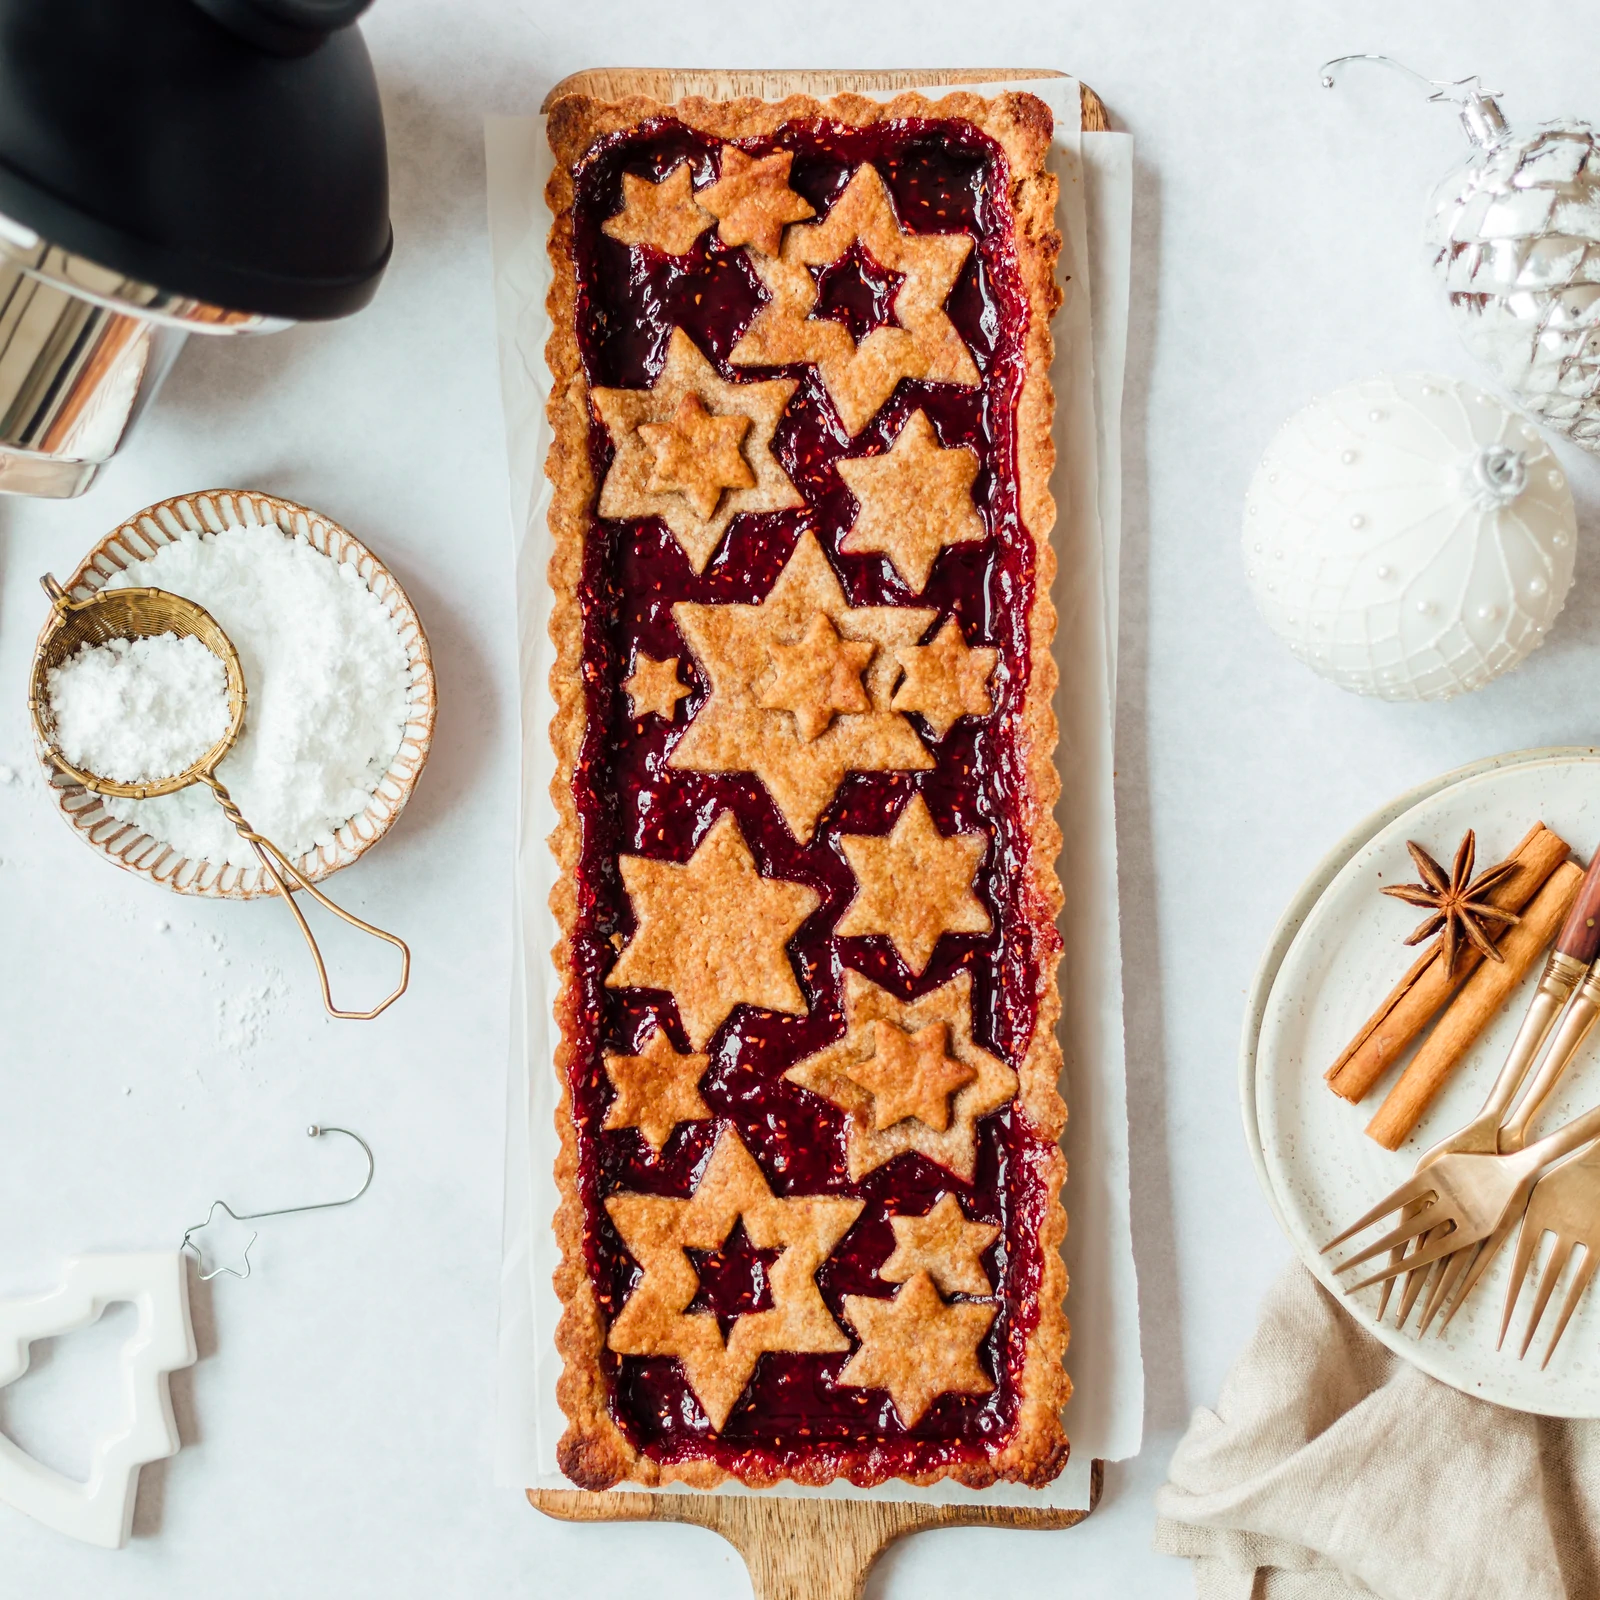 Vegan Linzer tart with festive spiced crust and jam filling by Almond Cow